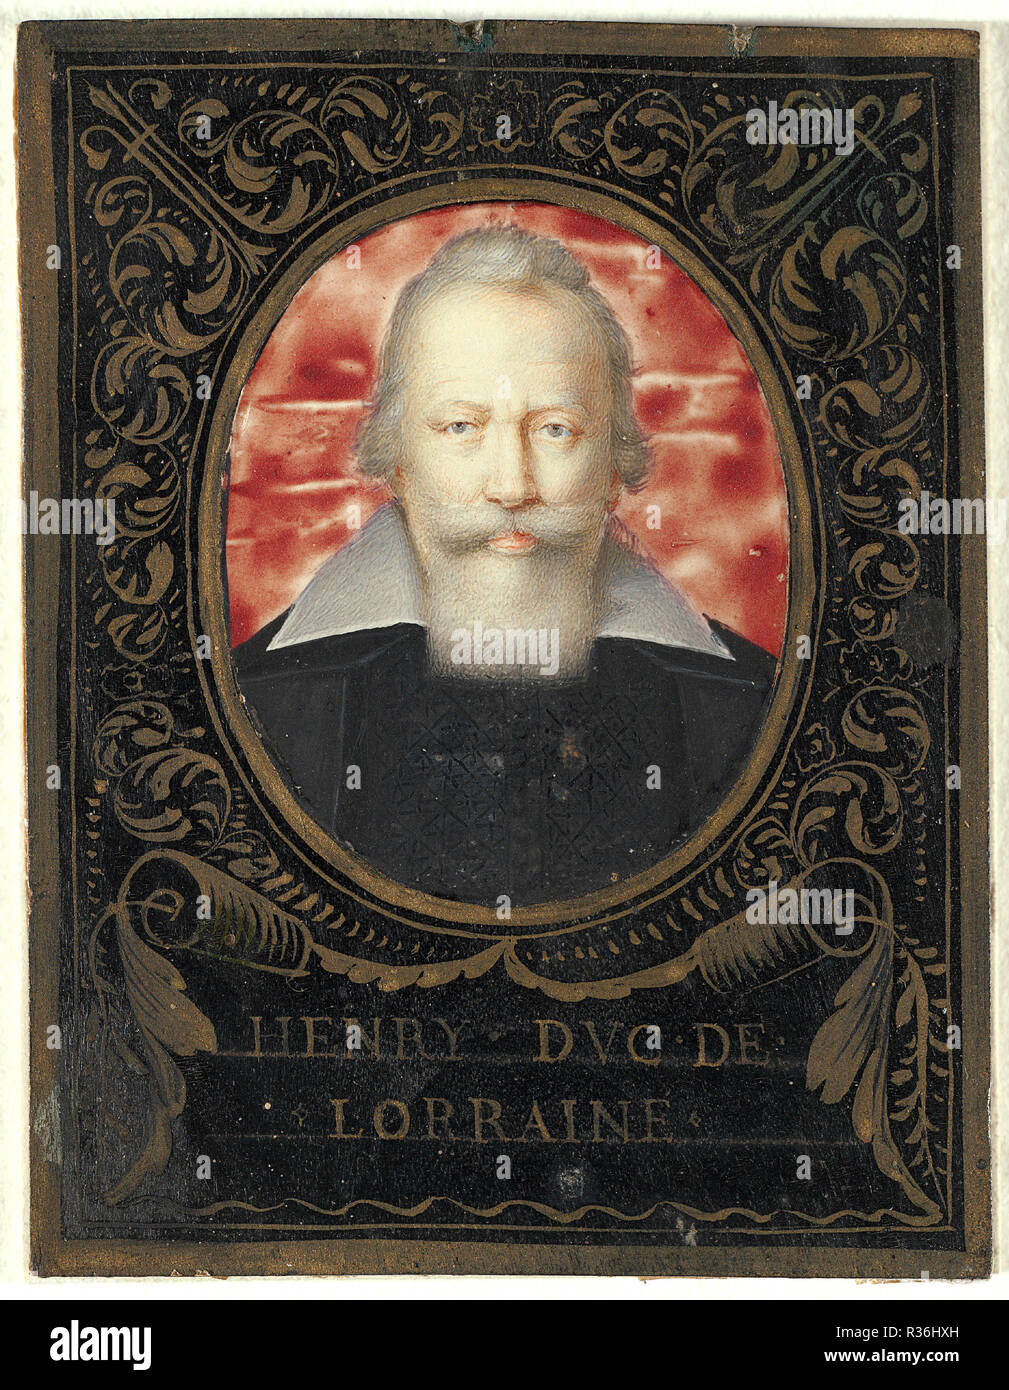 Henry, Duke of Lorrain. Dated: first quarter 17th century. Dimensions: Overall: 7.4 x 5.9 cm (2 15/16 x 2 5/16 in.)  overall: 24.3 x 19.5 cm (9 9/16 x 7 11/16 in.). Medium: gouache on parchment, mounted to wood. Museum: National Gallery of Art, Washington DC. Author: European 17th Century. Stock Photo